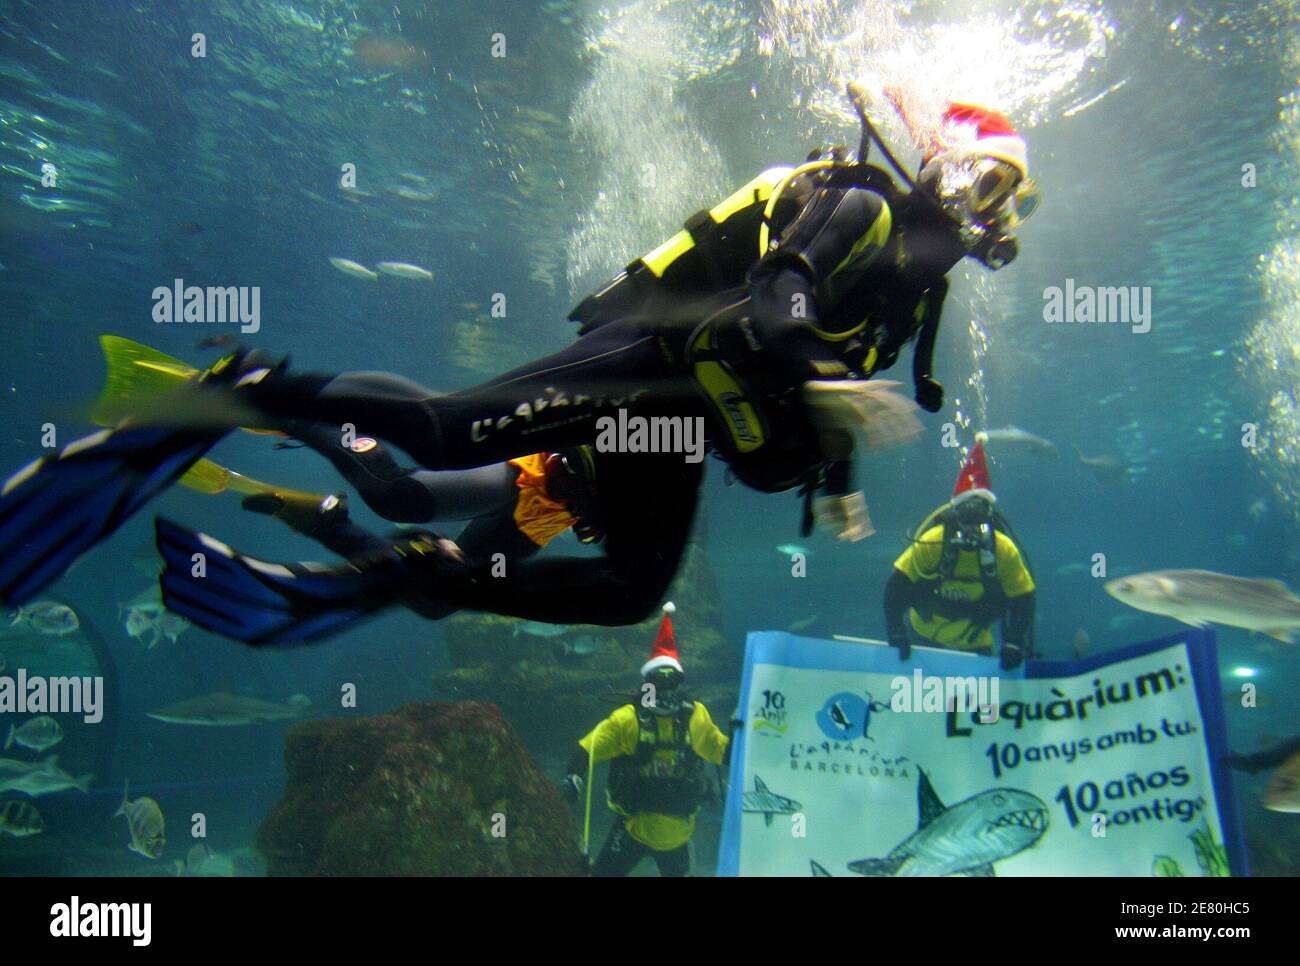 Barcelona's soccer player Lionel Messi (top) of Argentina waves from inside a tank at the Barcelona Aquarium while wearing a Santa Claus' hat in Barcelona December 19, 2005. The aquarium celebrates its anniversary each year with a sport or celebrity personality. The banner in the background reads 'Ten years with you' in celebration of the aquarium's ten year anniversary. REUTERS/Gustau Nacarino Stock Photo